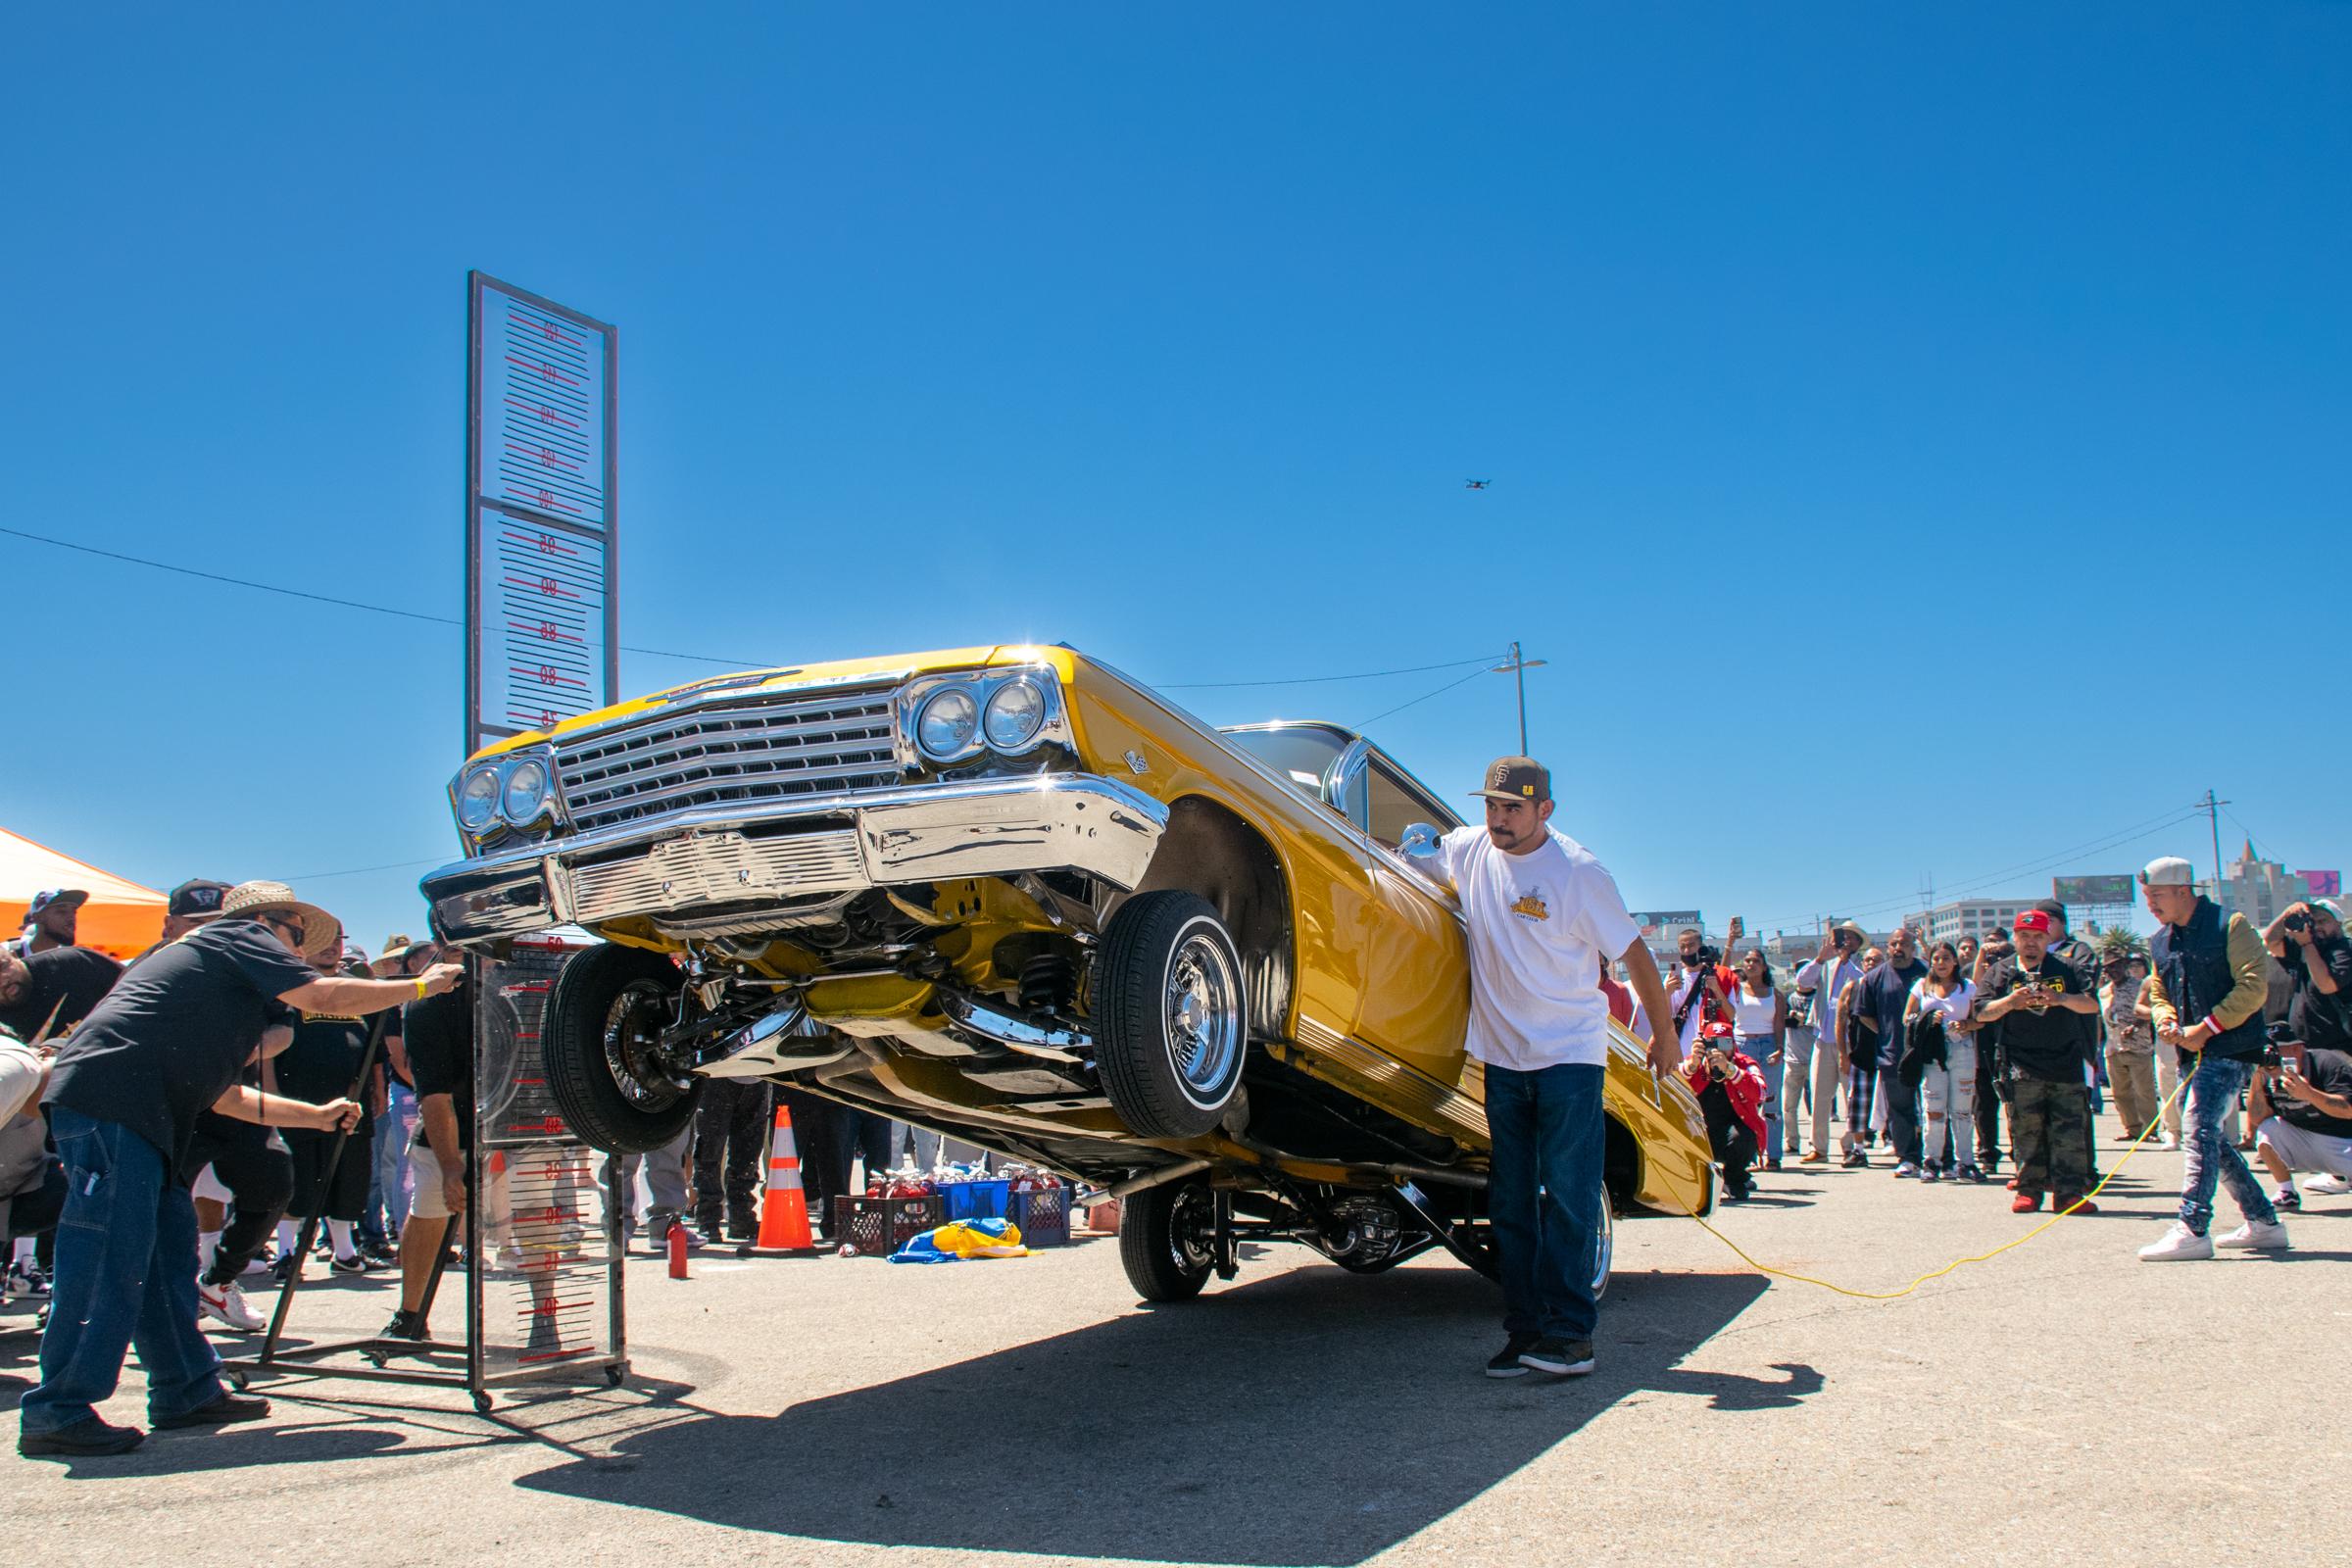 Lowriders Show: King of the Streets - A 1962 gold Impala owned by Alexander Dominguez...